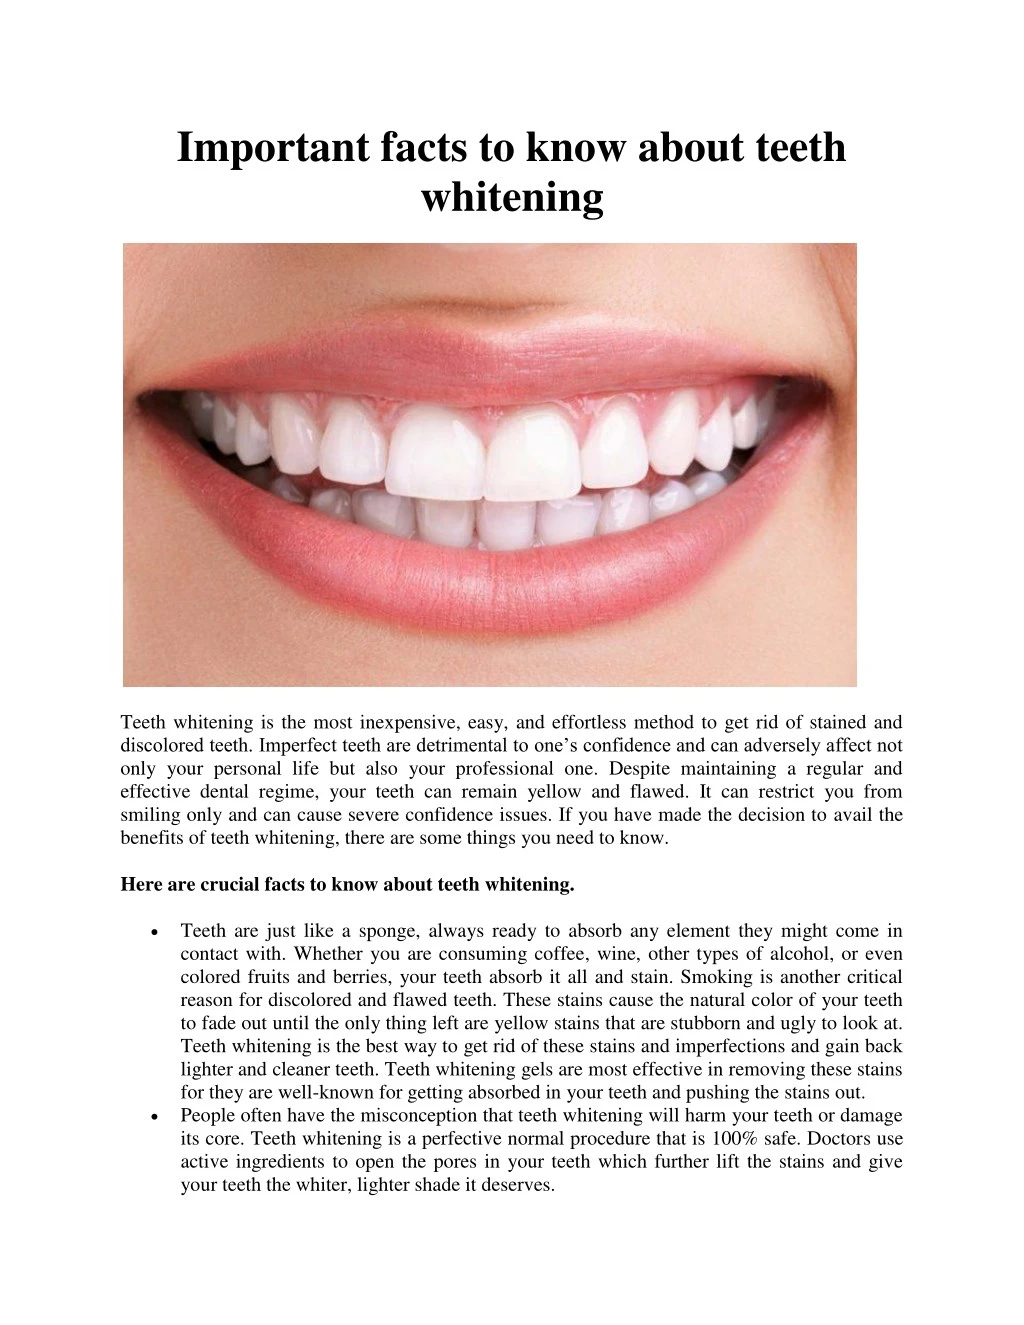 important facts to know about teeth whitening